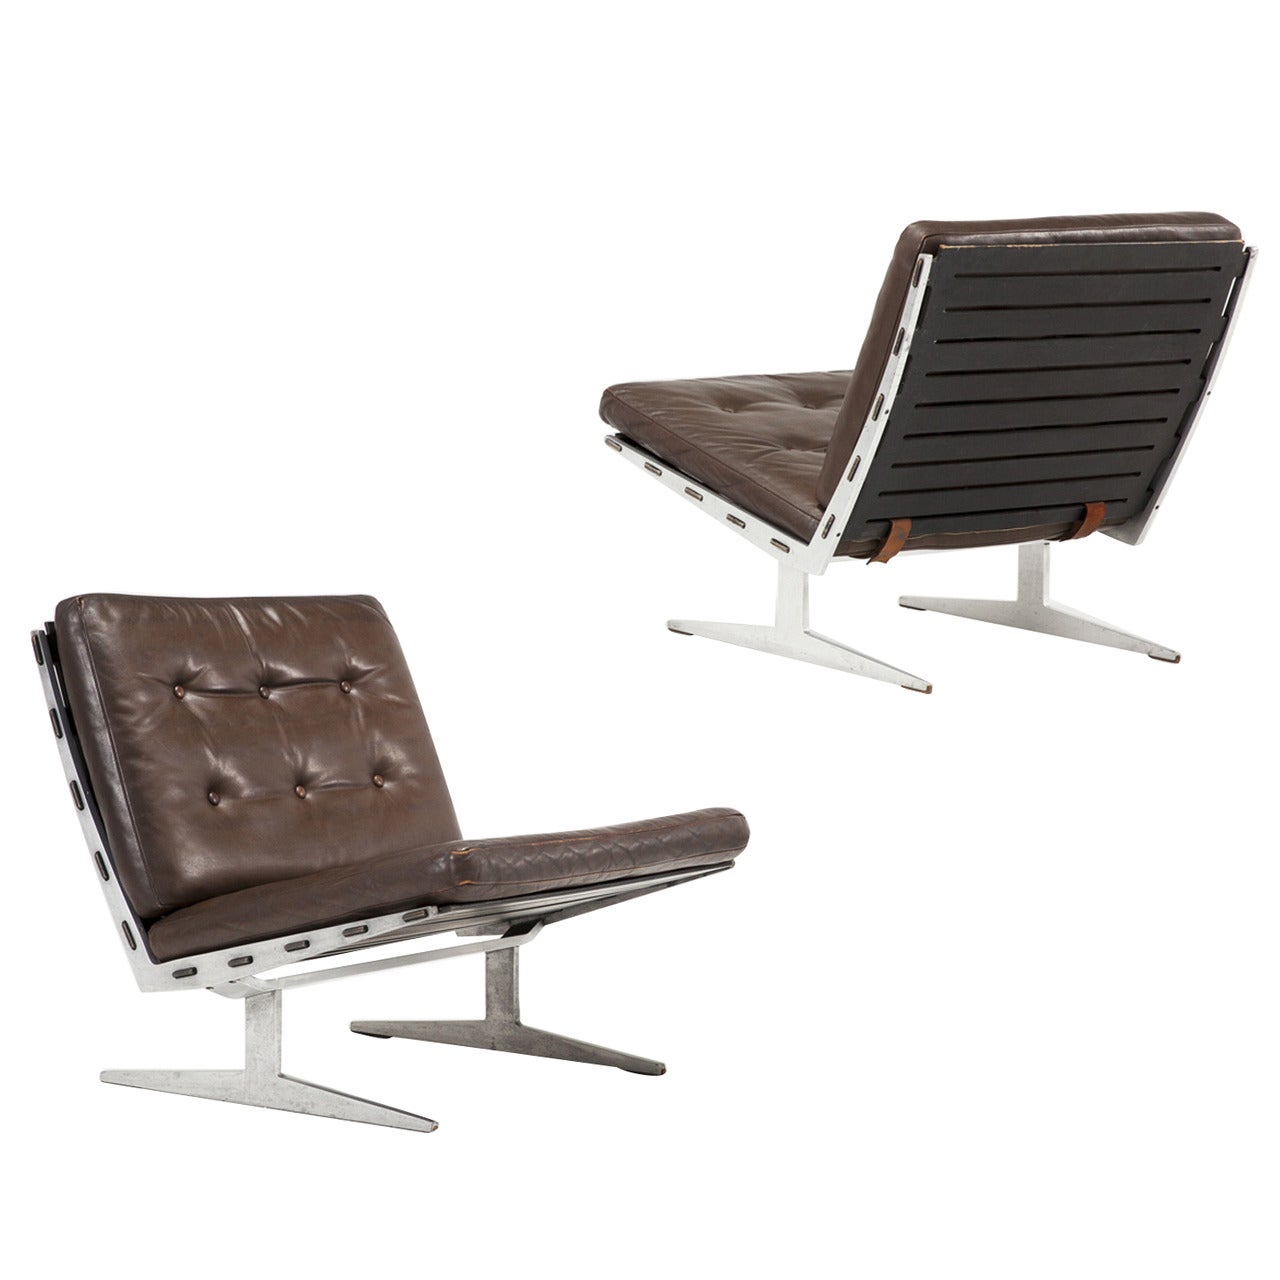 Pair of brown leather slipper chairs with aluminum frame